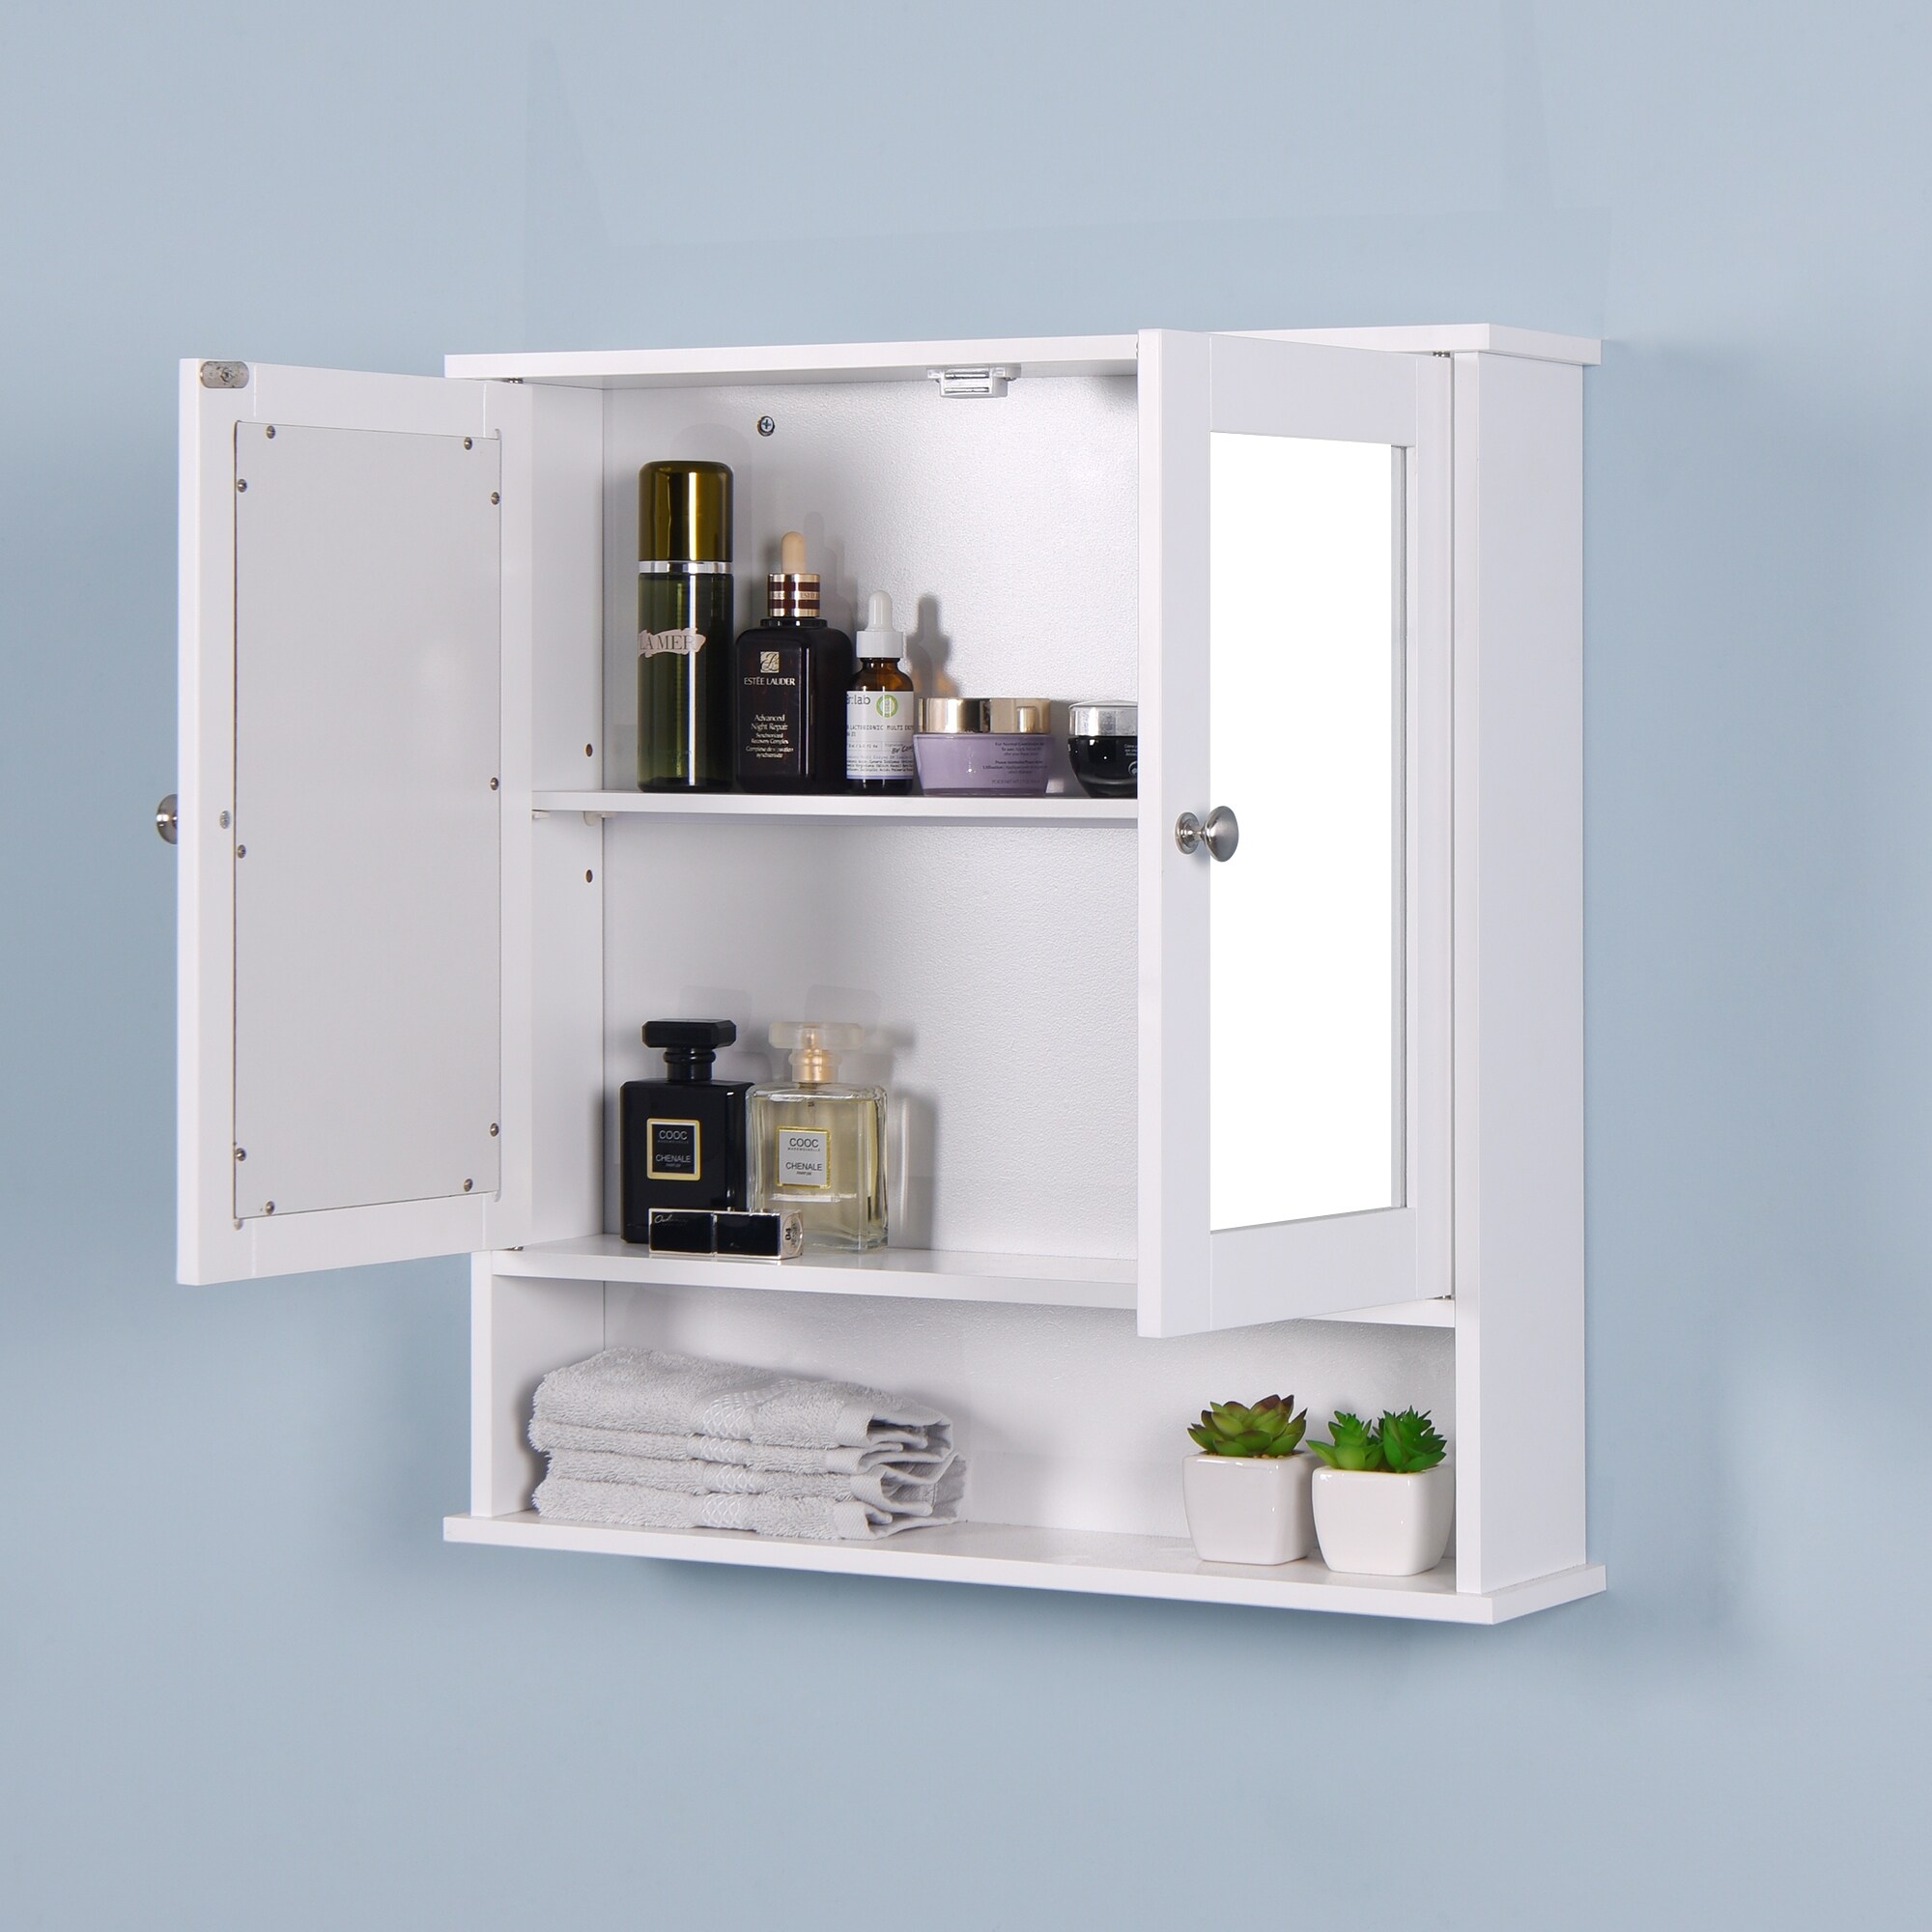 https://ak1.ostkcdn.com/images/products/is/images/direct/3c9d6d1e871012fd1d44c429302823af0cefdc21/Nestfair-Wall-Mounted-Bathroom-Cabinet-with-2-Mirror-Doors-and-Adjustable-Shelf.jpg